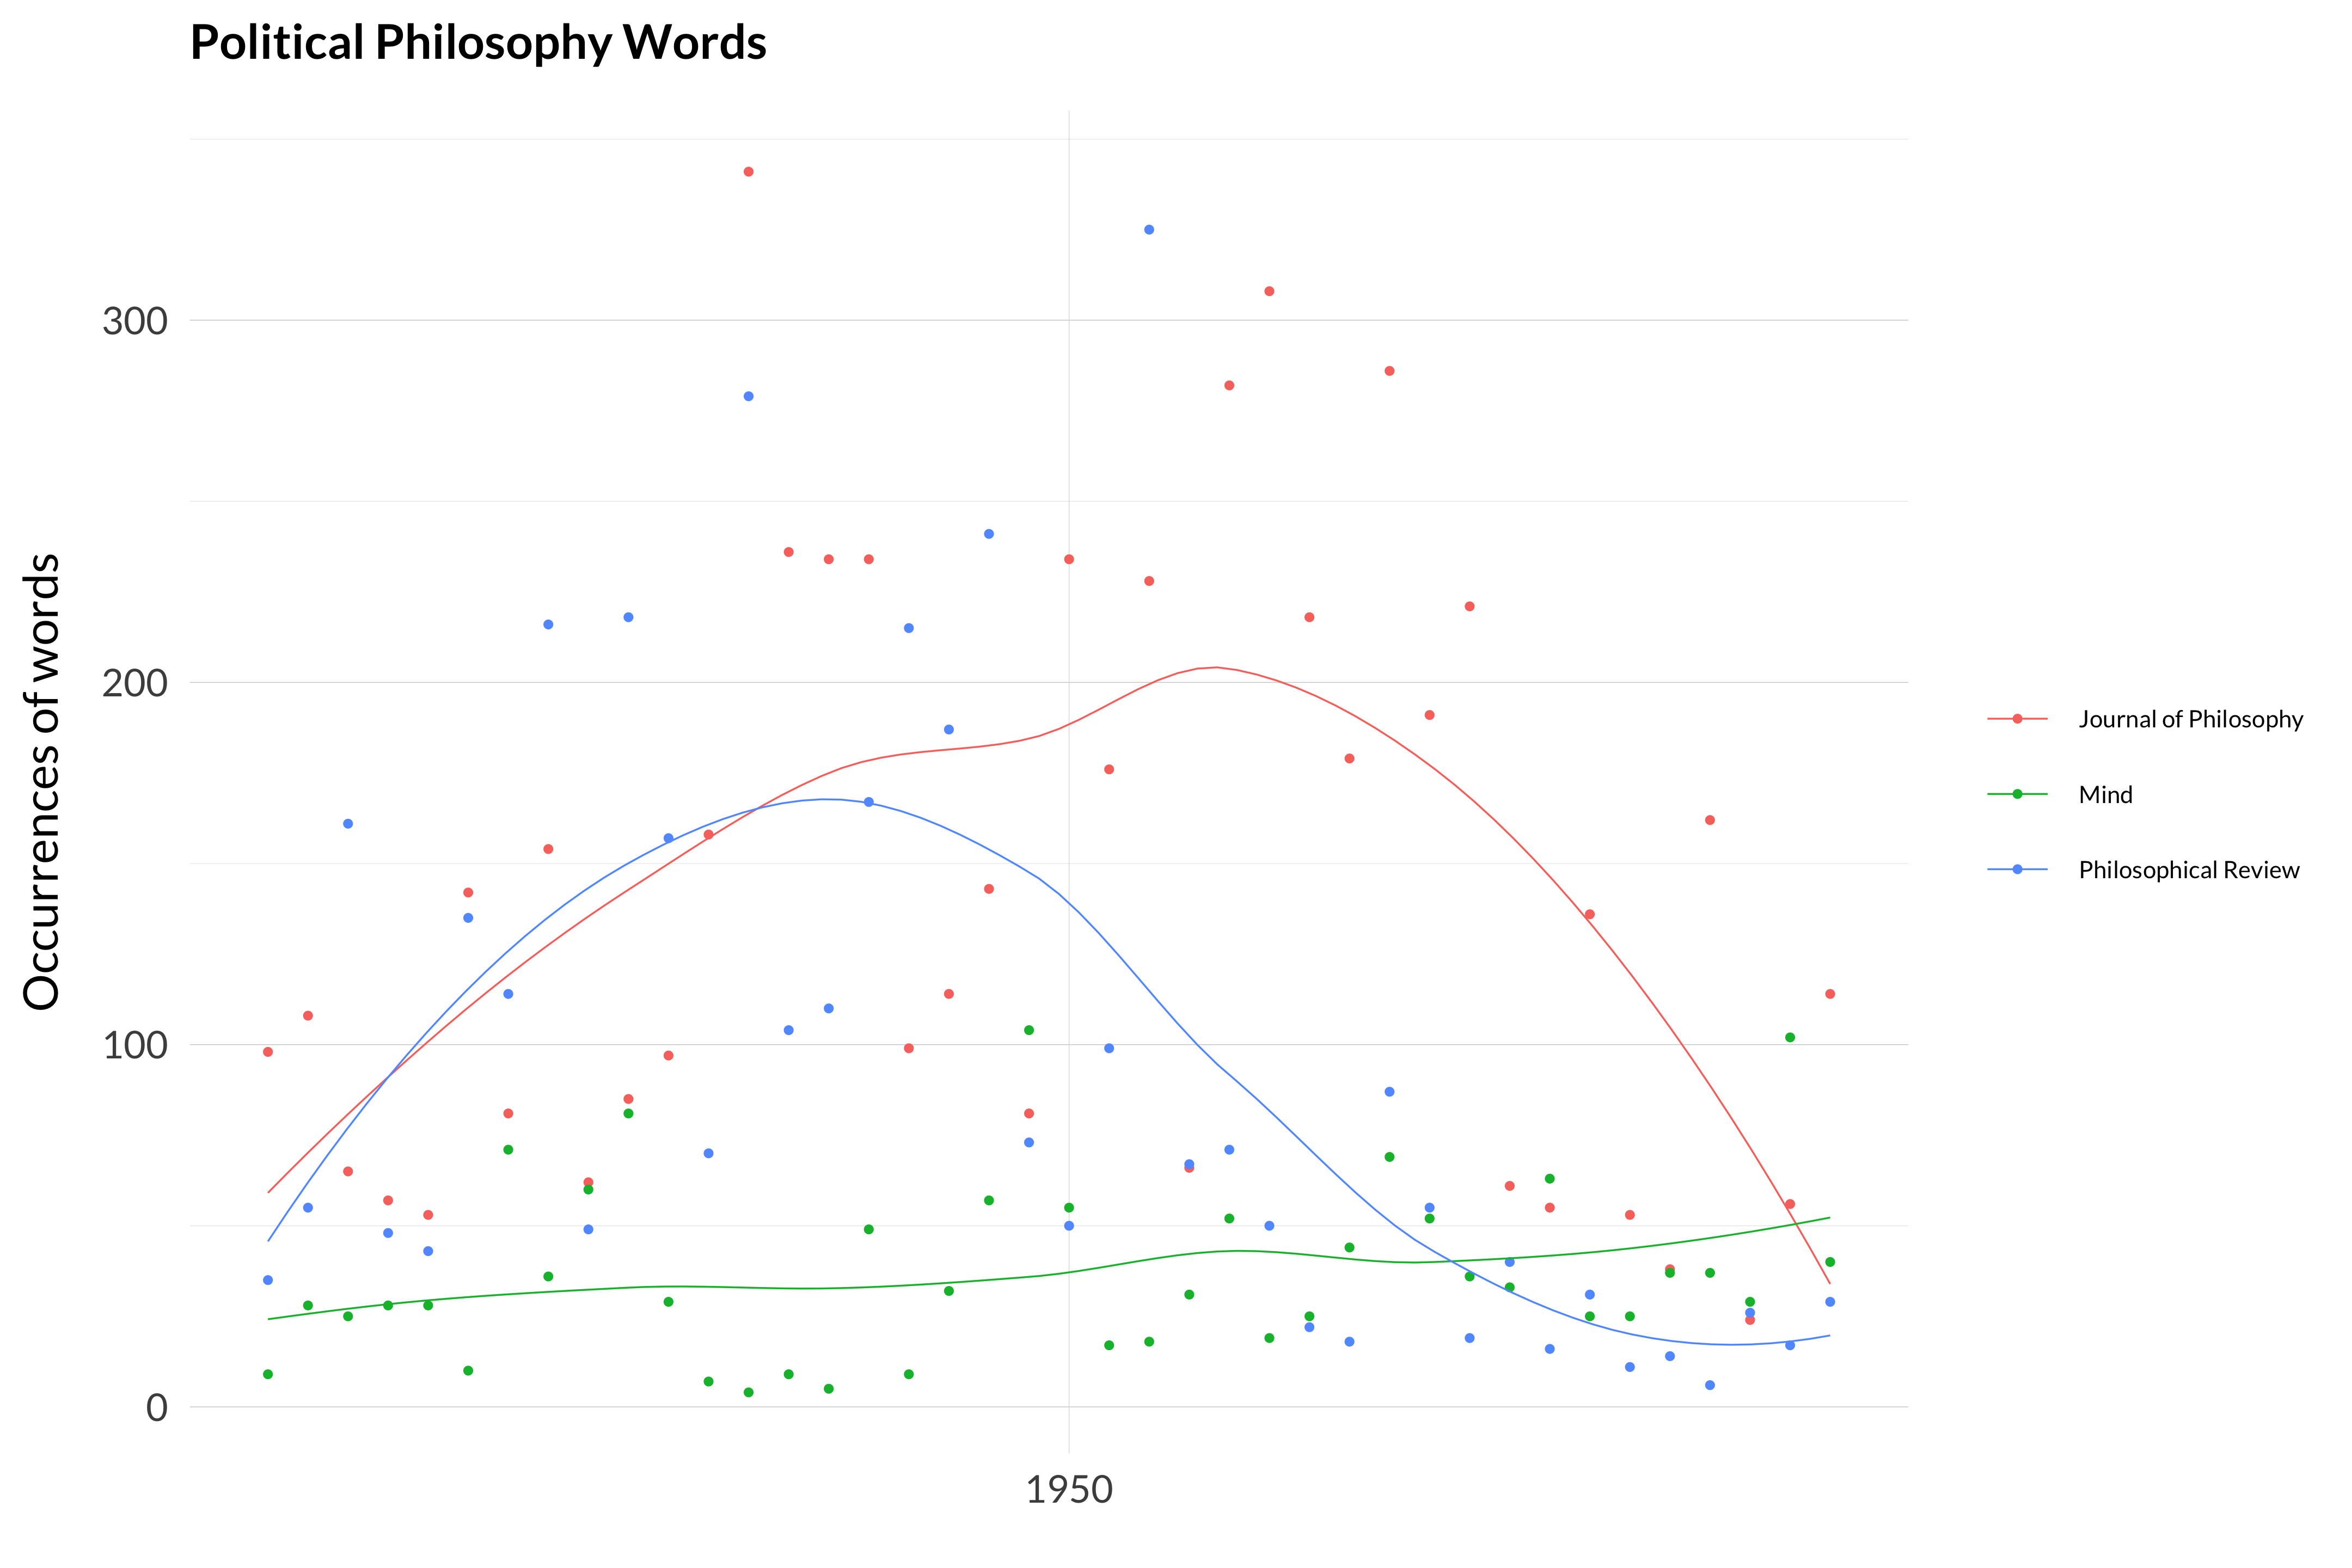 A single scatterplot showing the sums of the values in the six scatterplots in the previous graph. A loess curve through the graph shows that they start declining in frequency in Philosophical Review in the late 1940s, and in Journal of Philosophy in the mid 1950s.